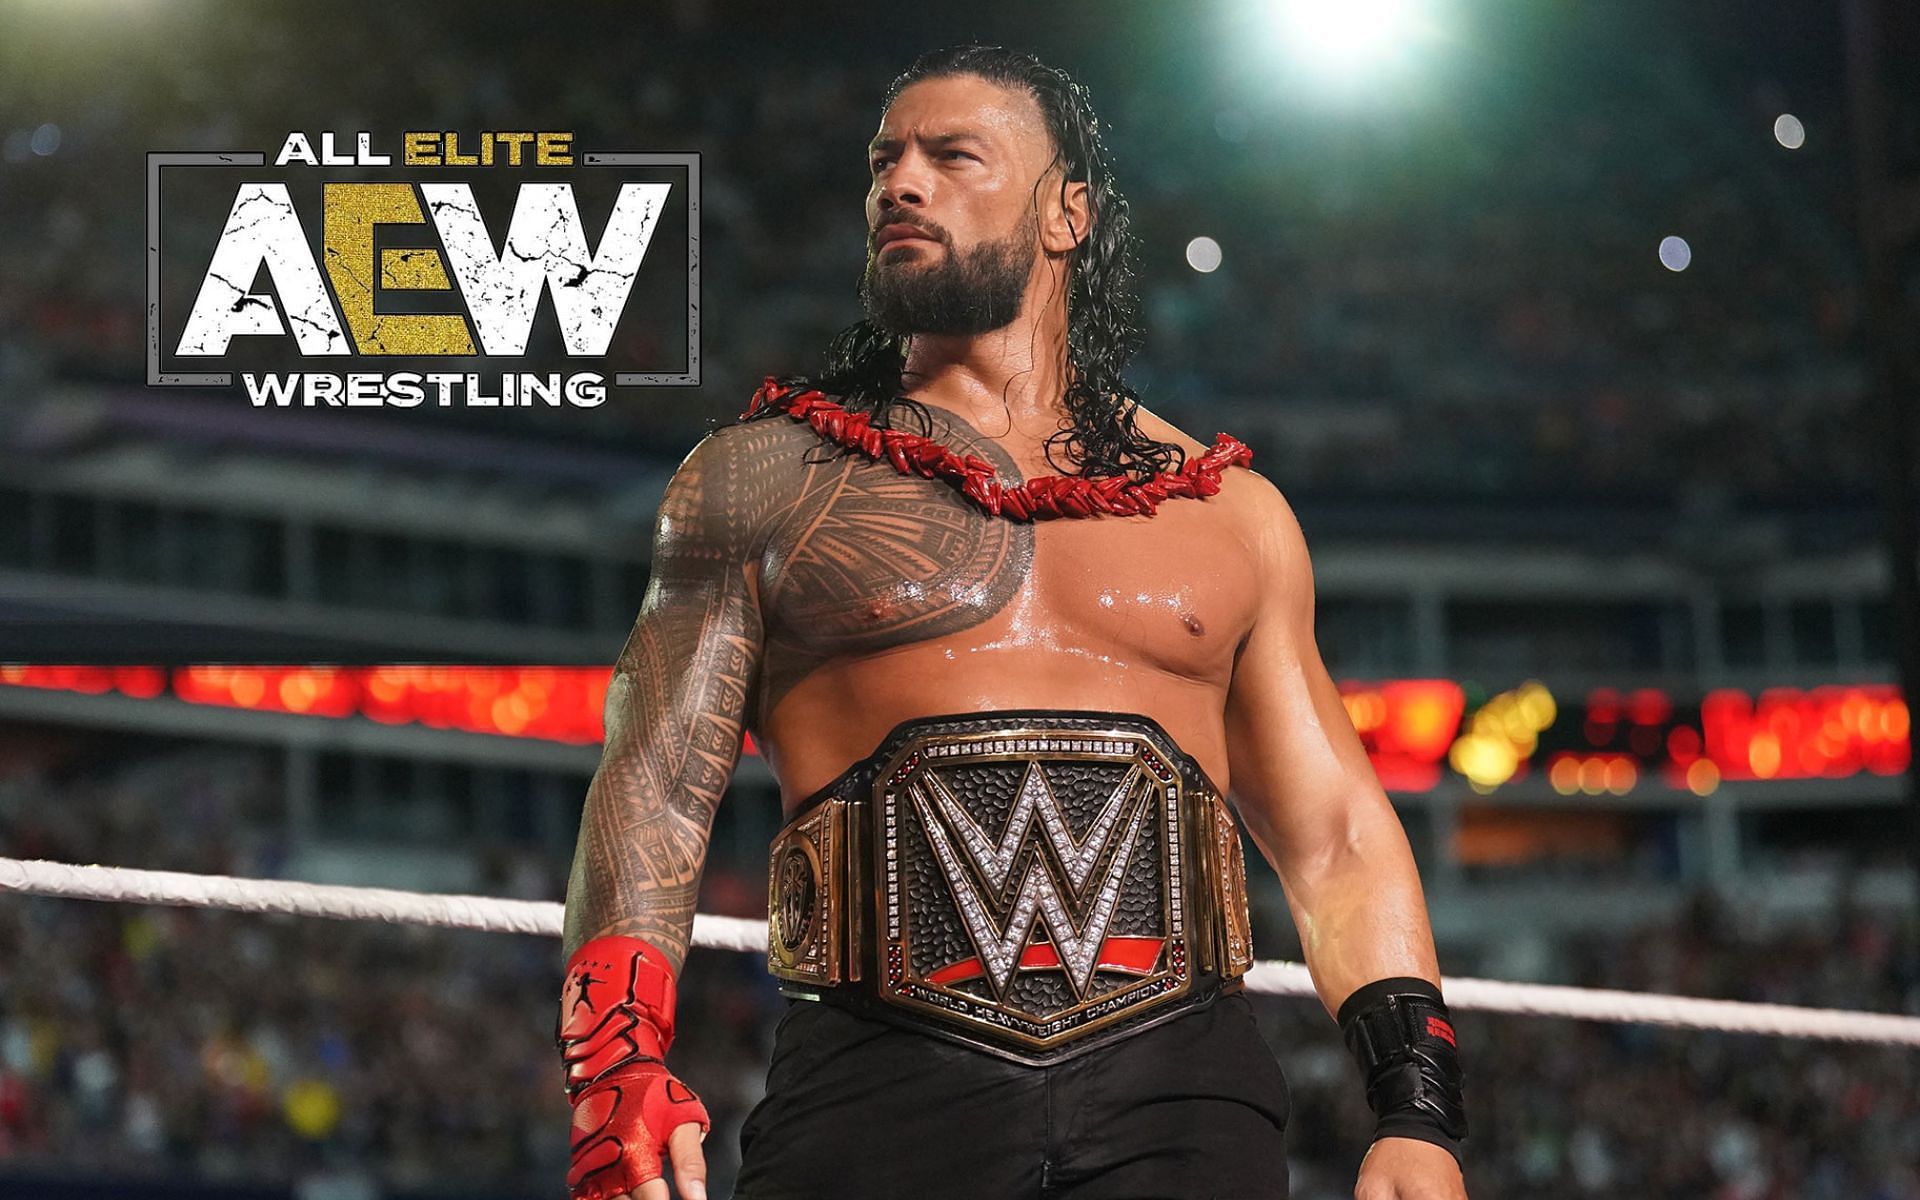 An AEW star said he was a follower of the Undisputed WWE Universal Champion, Roman Reigns.